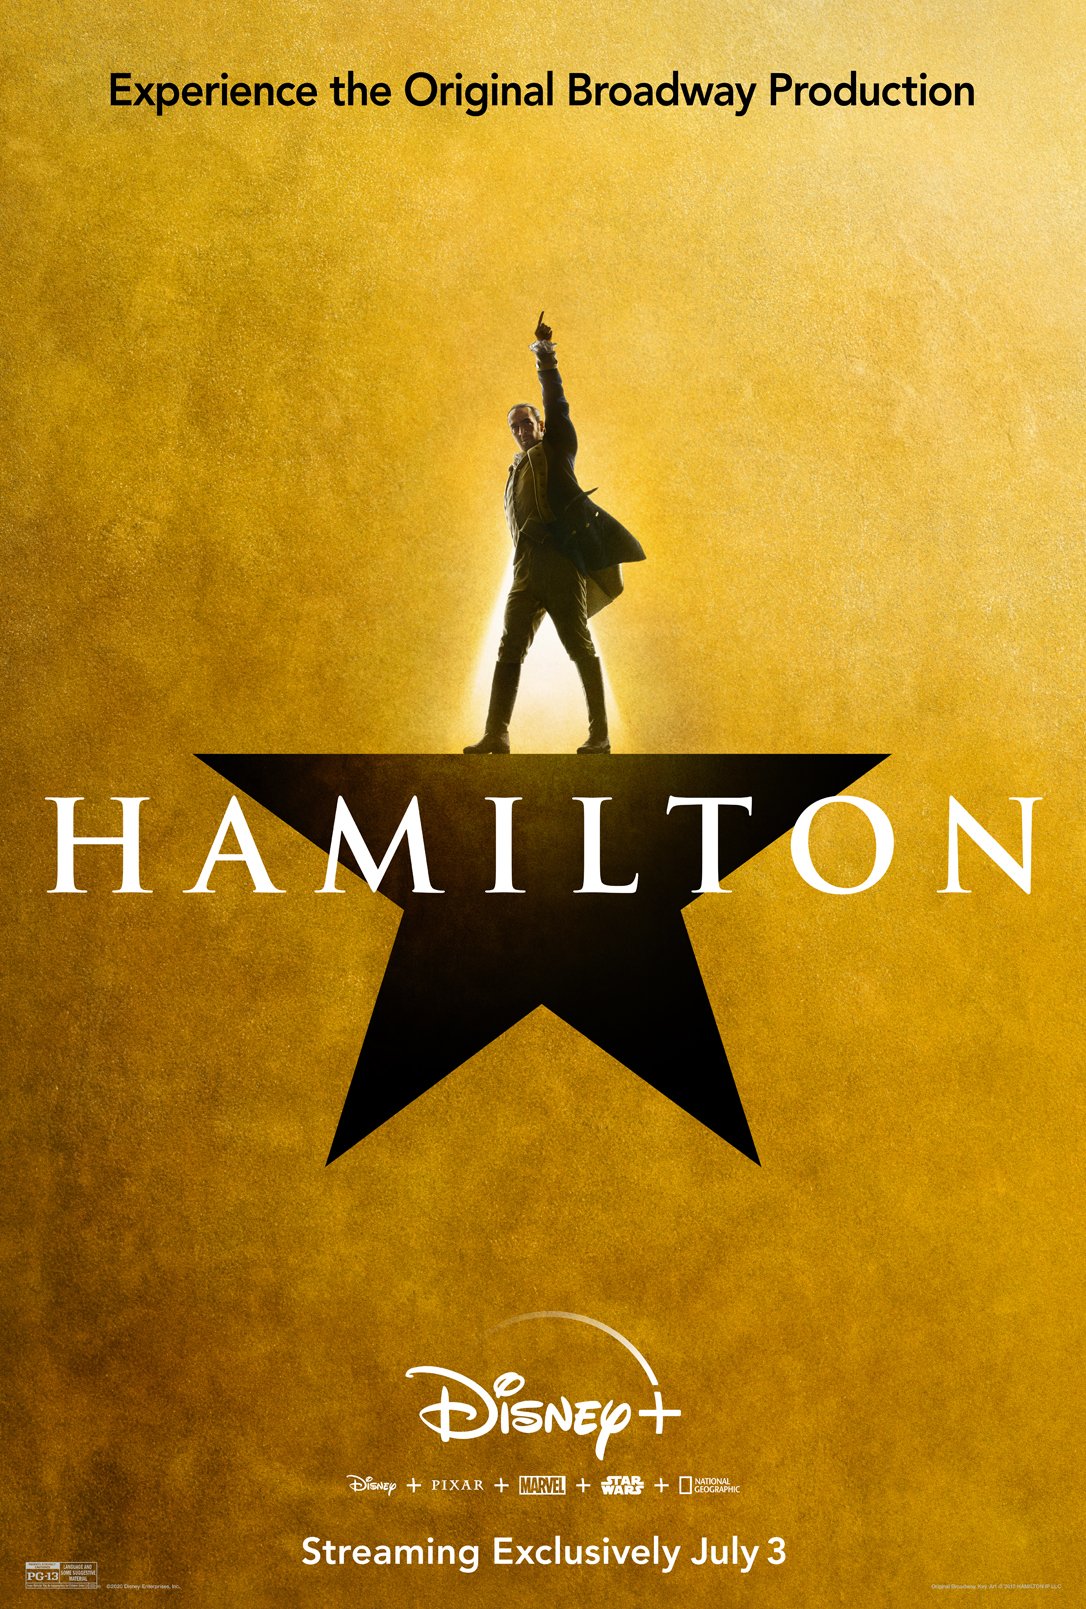 A shadow figure standing on black star with a gold background. The word "Hamilton" is in white in the center of the picture.